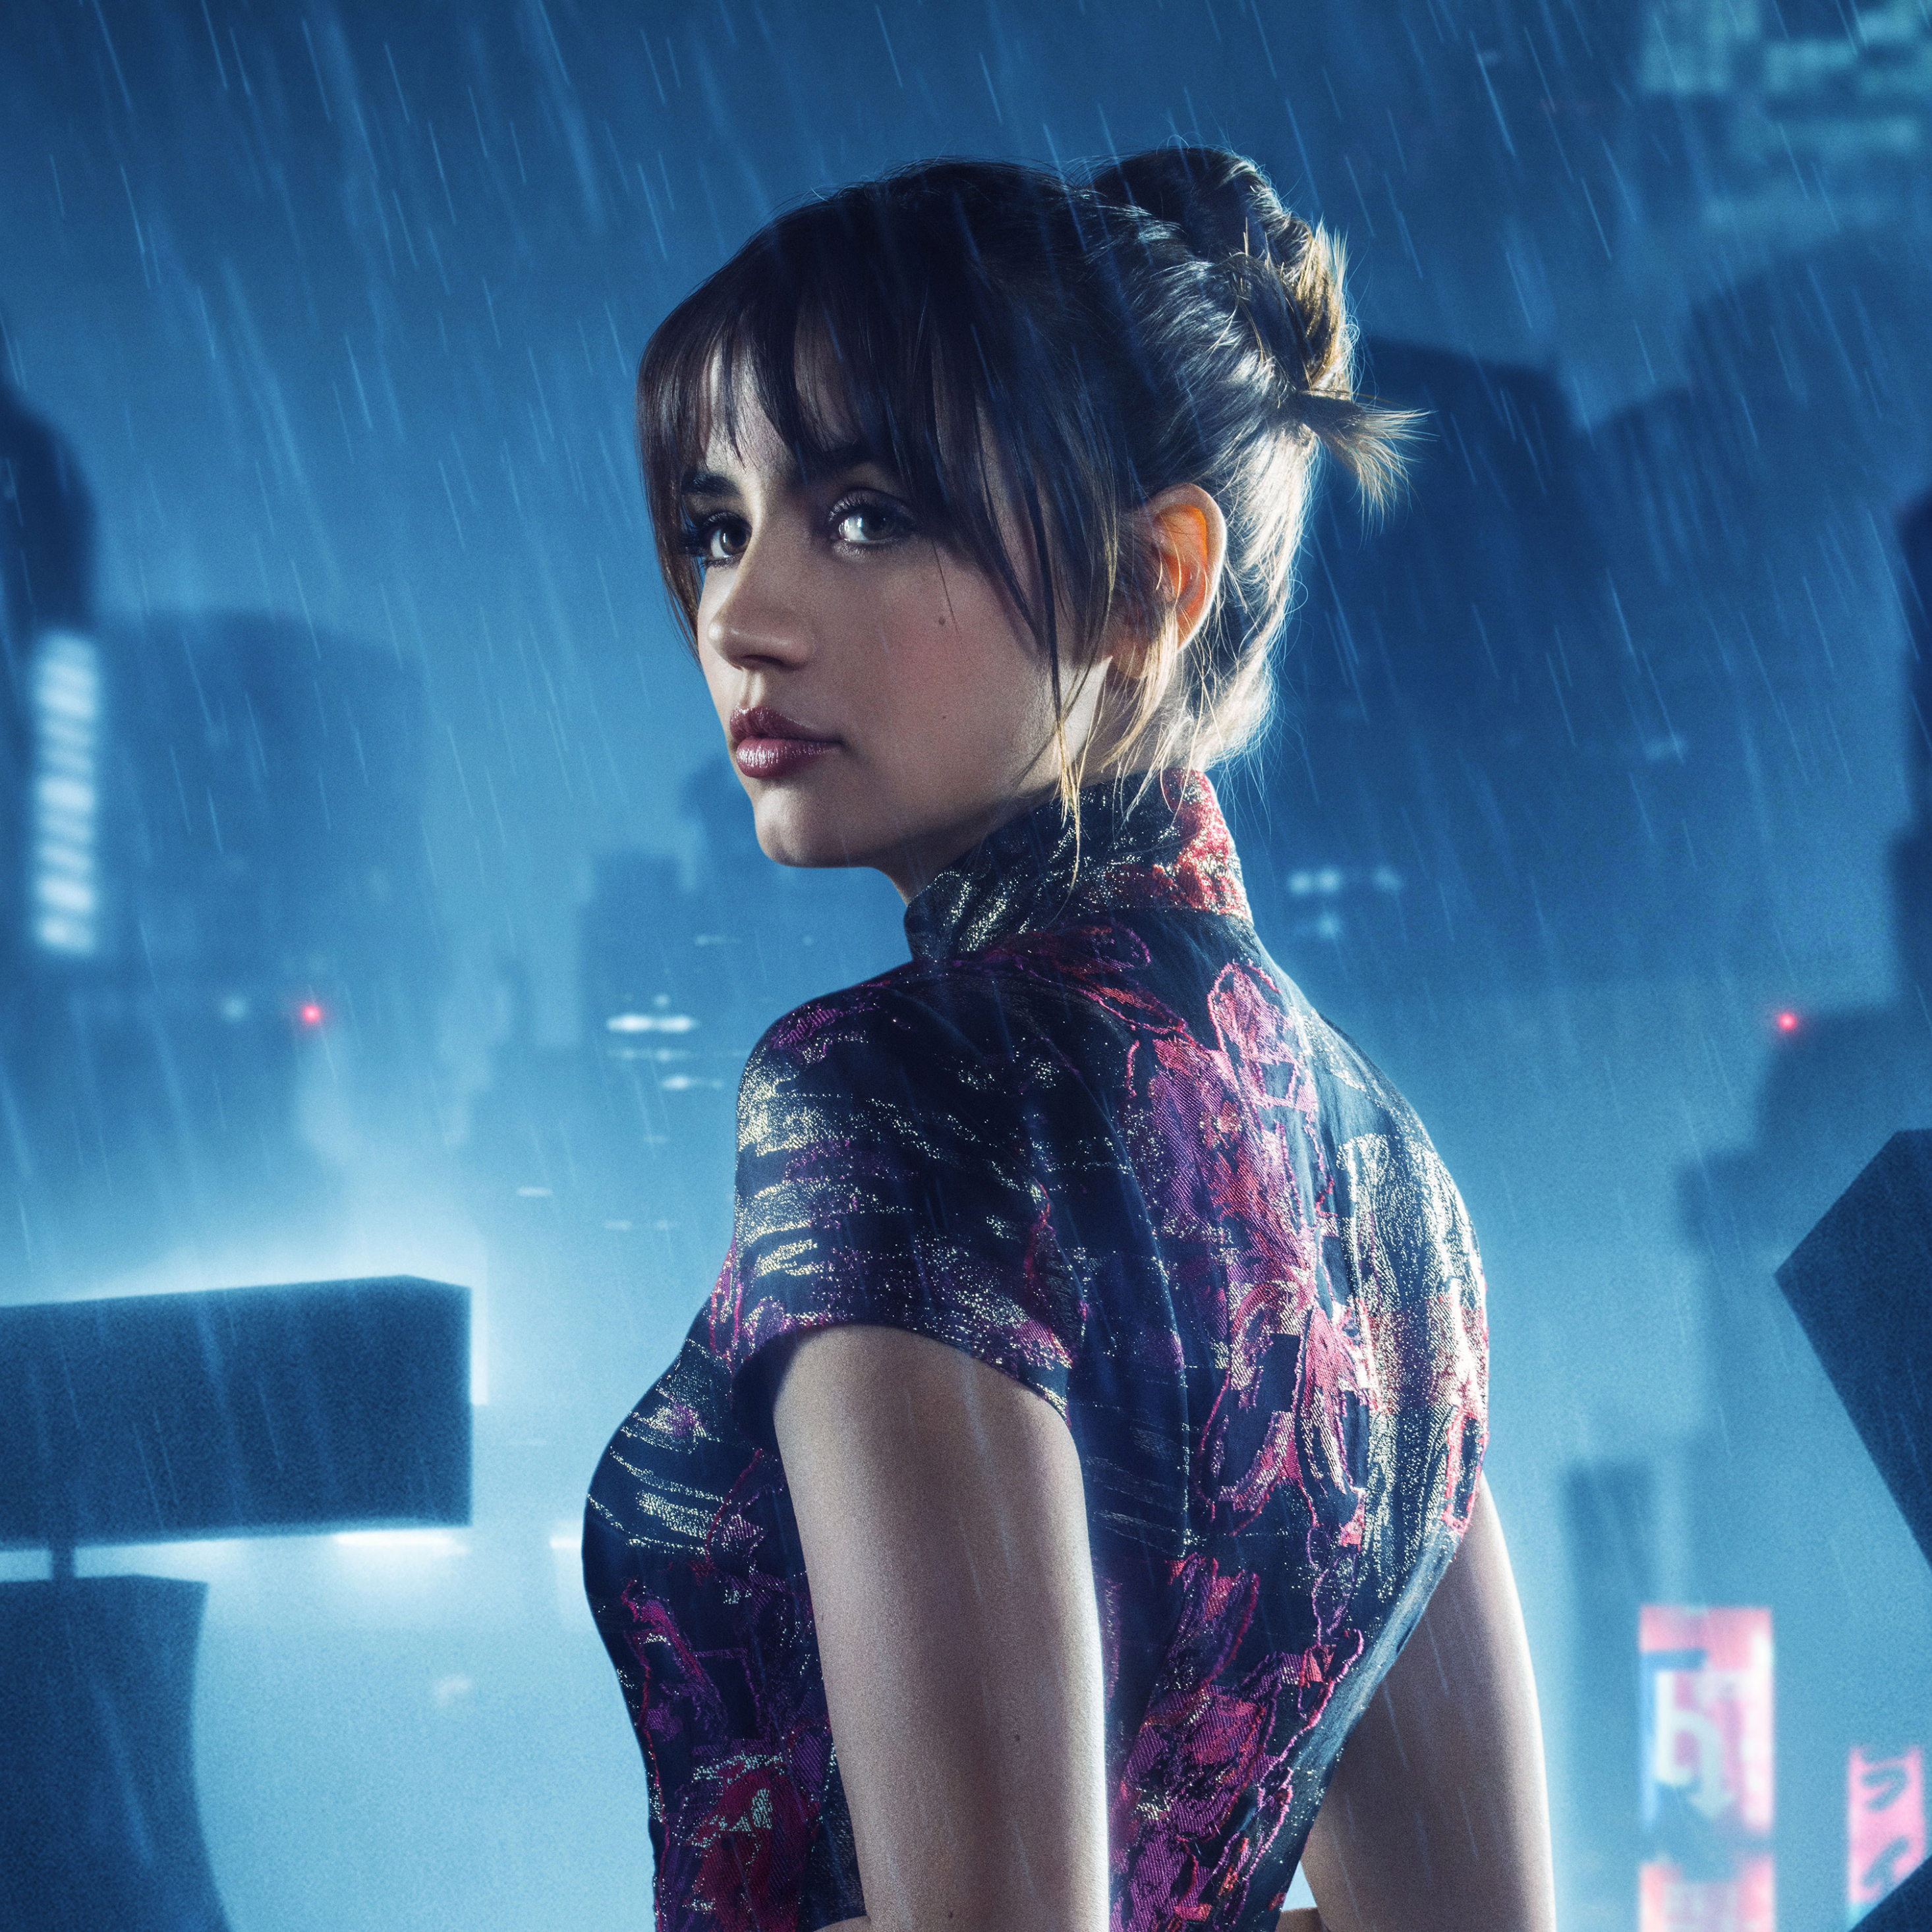 2932x2932 Ana De Armas As Joi In Blade Runner 49 Ipad Pro Retina Display Wallpaper Hd Movies 4k Wallpapers Images Photos And Background